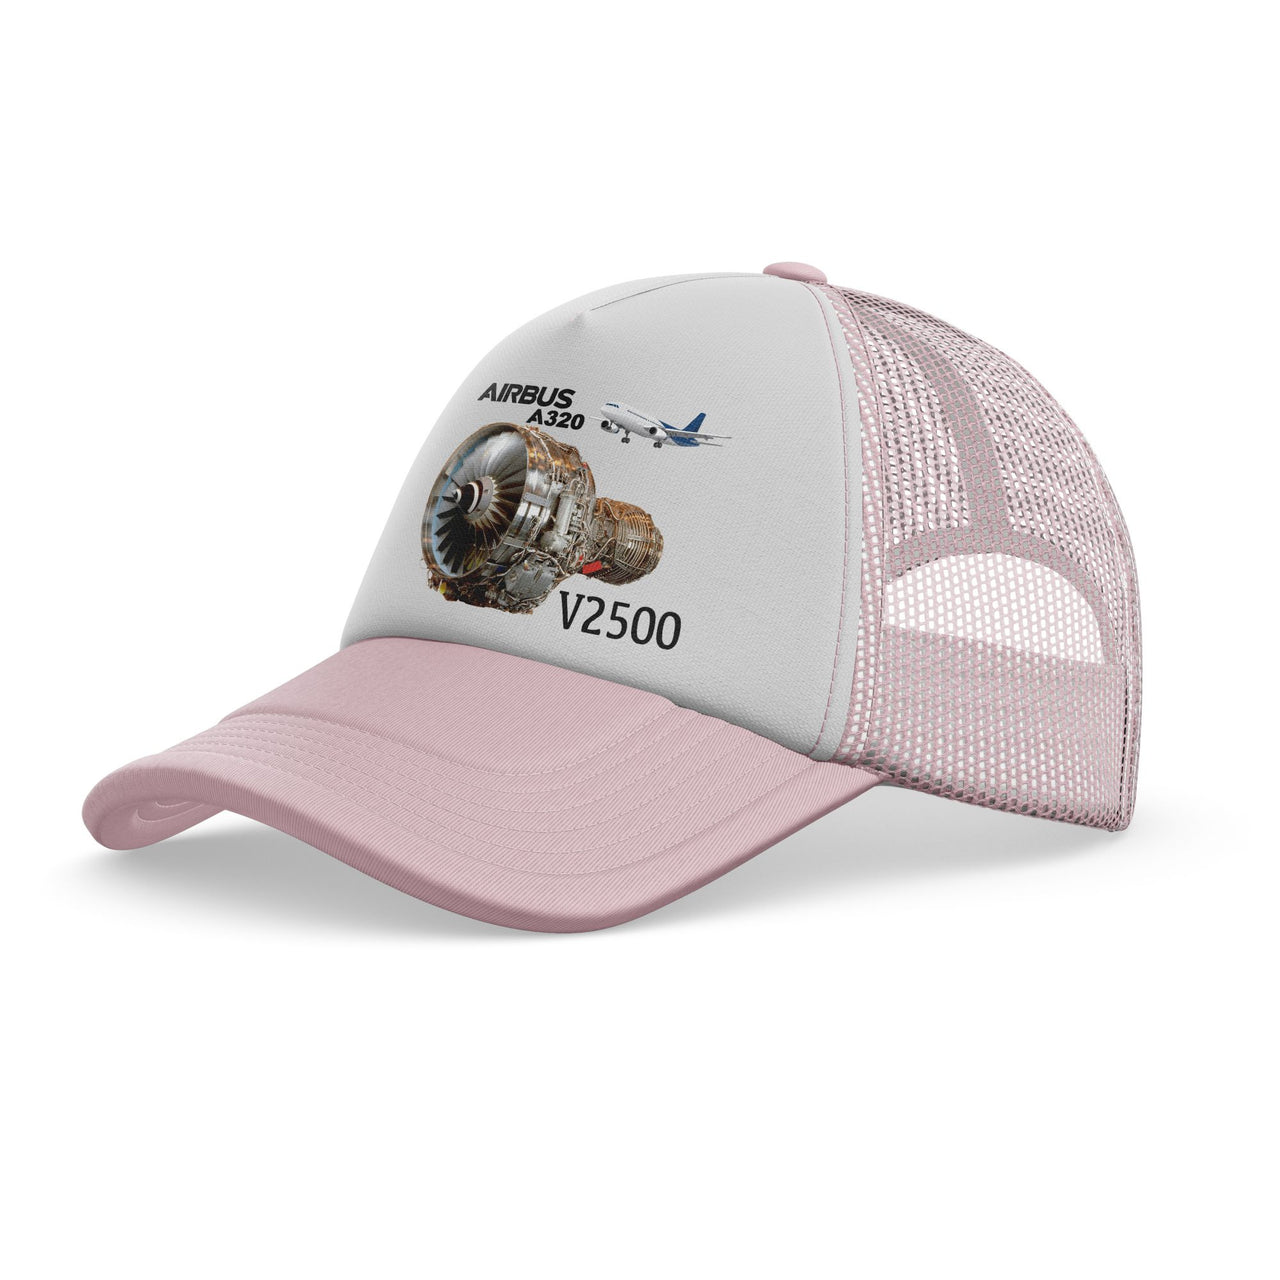 Airbus A320 & V2500 Engine Designed Trucker Caps & Hats